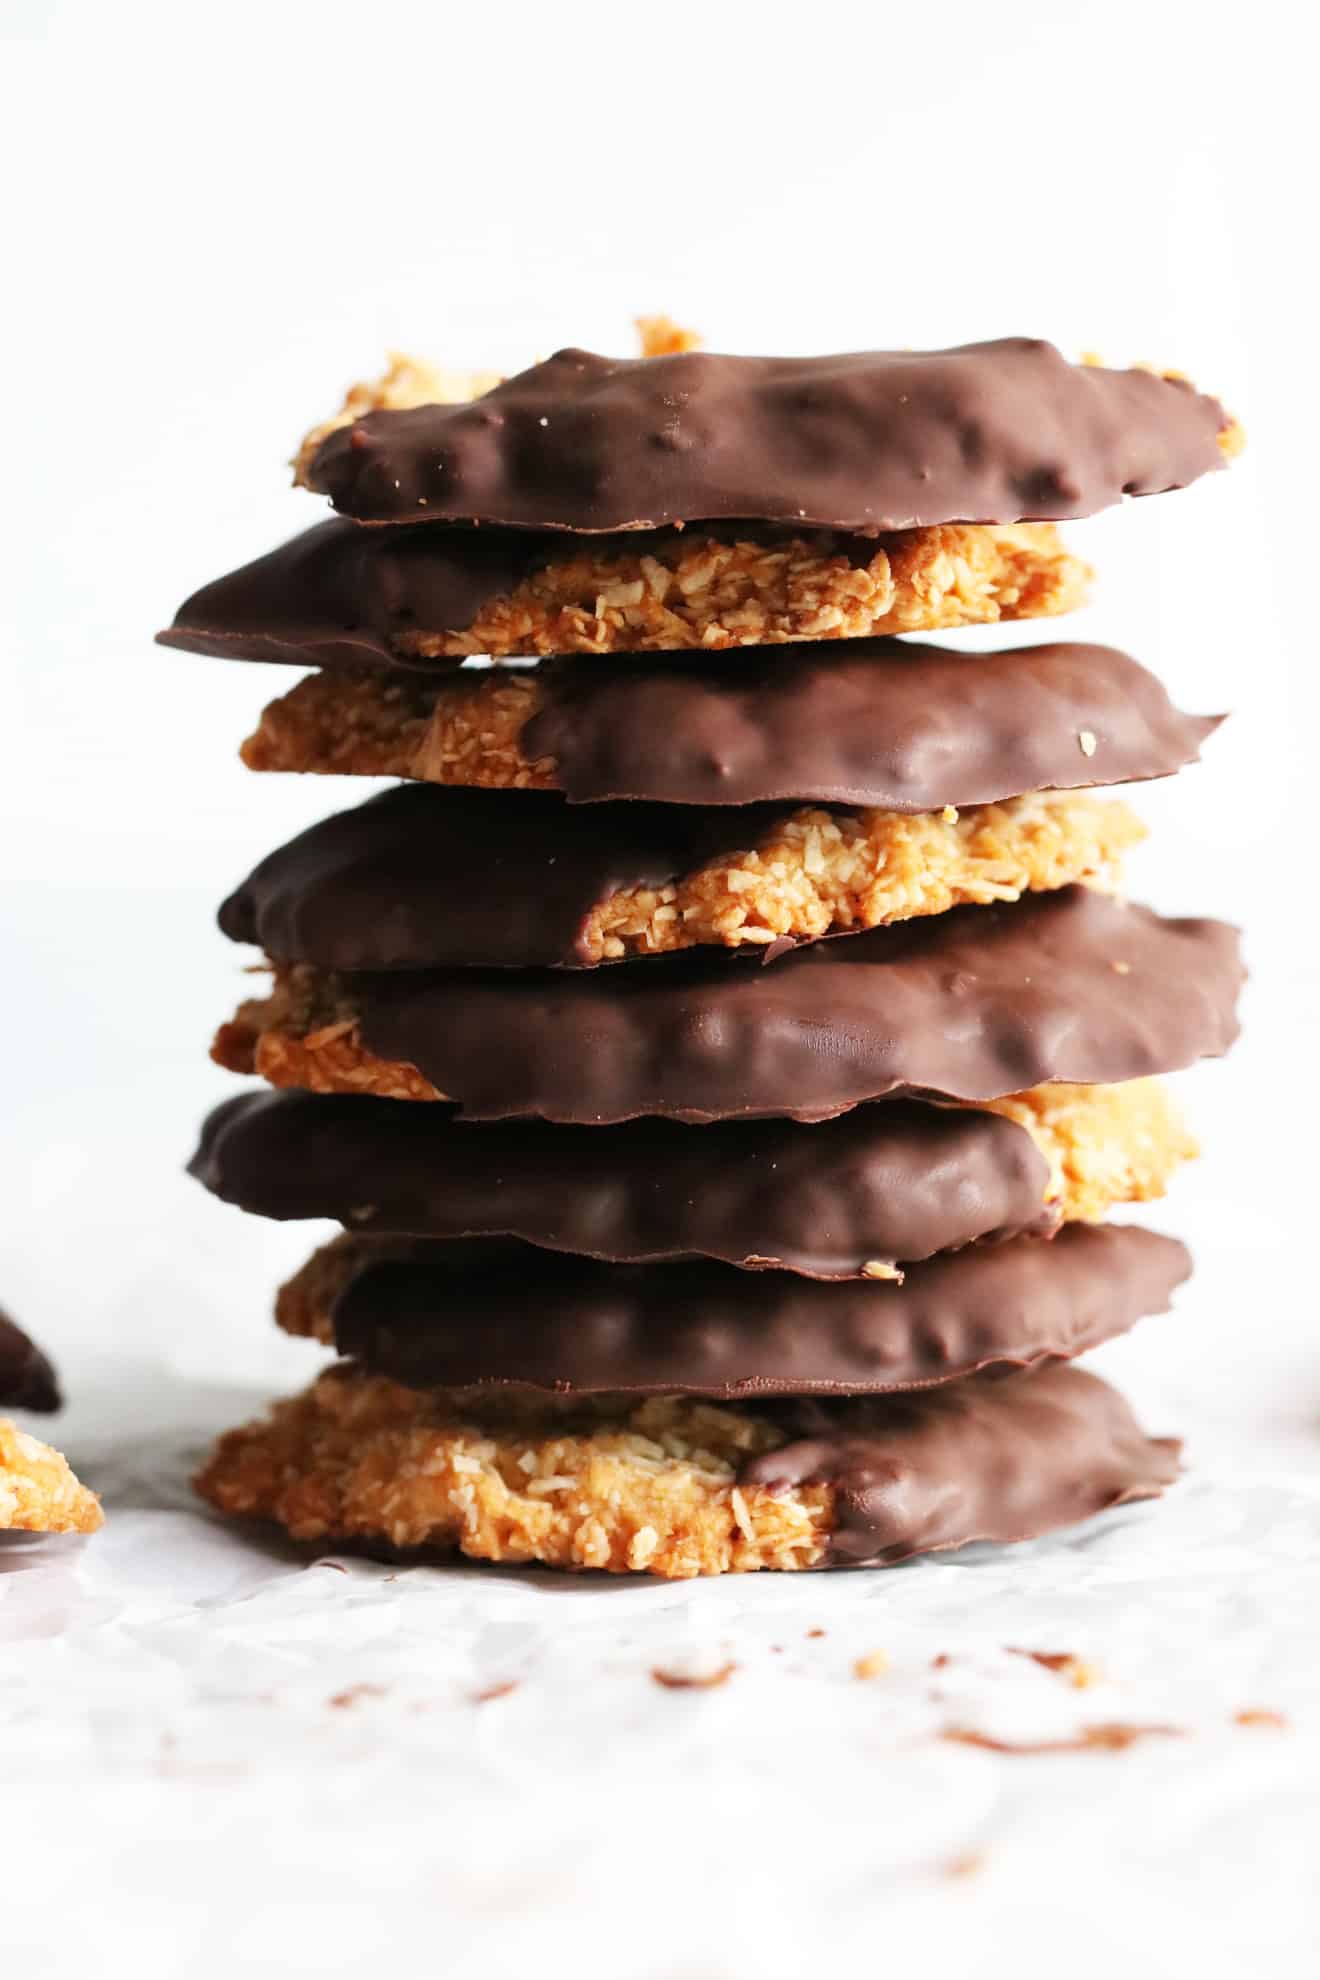 This is a stack of coconut cookies half dipped in chocolate. The stack of cookies is on a white surface with a white background. 